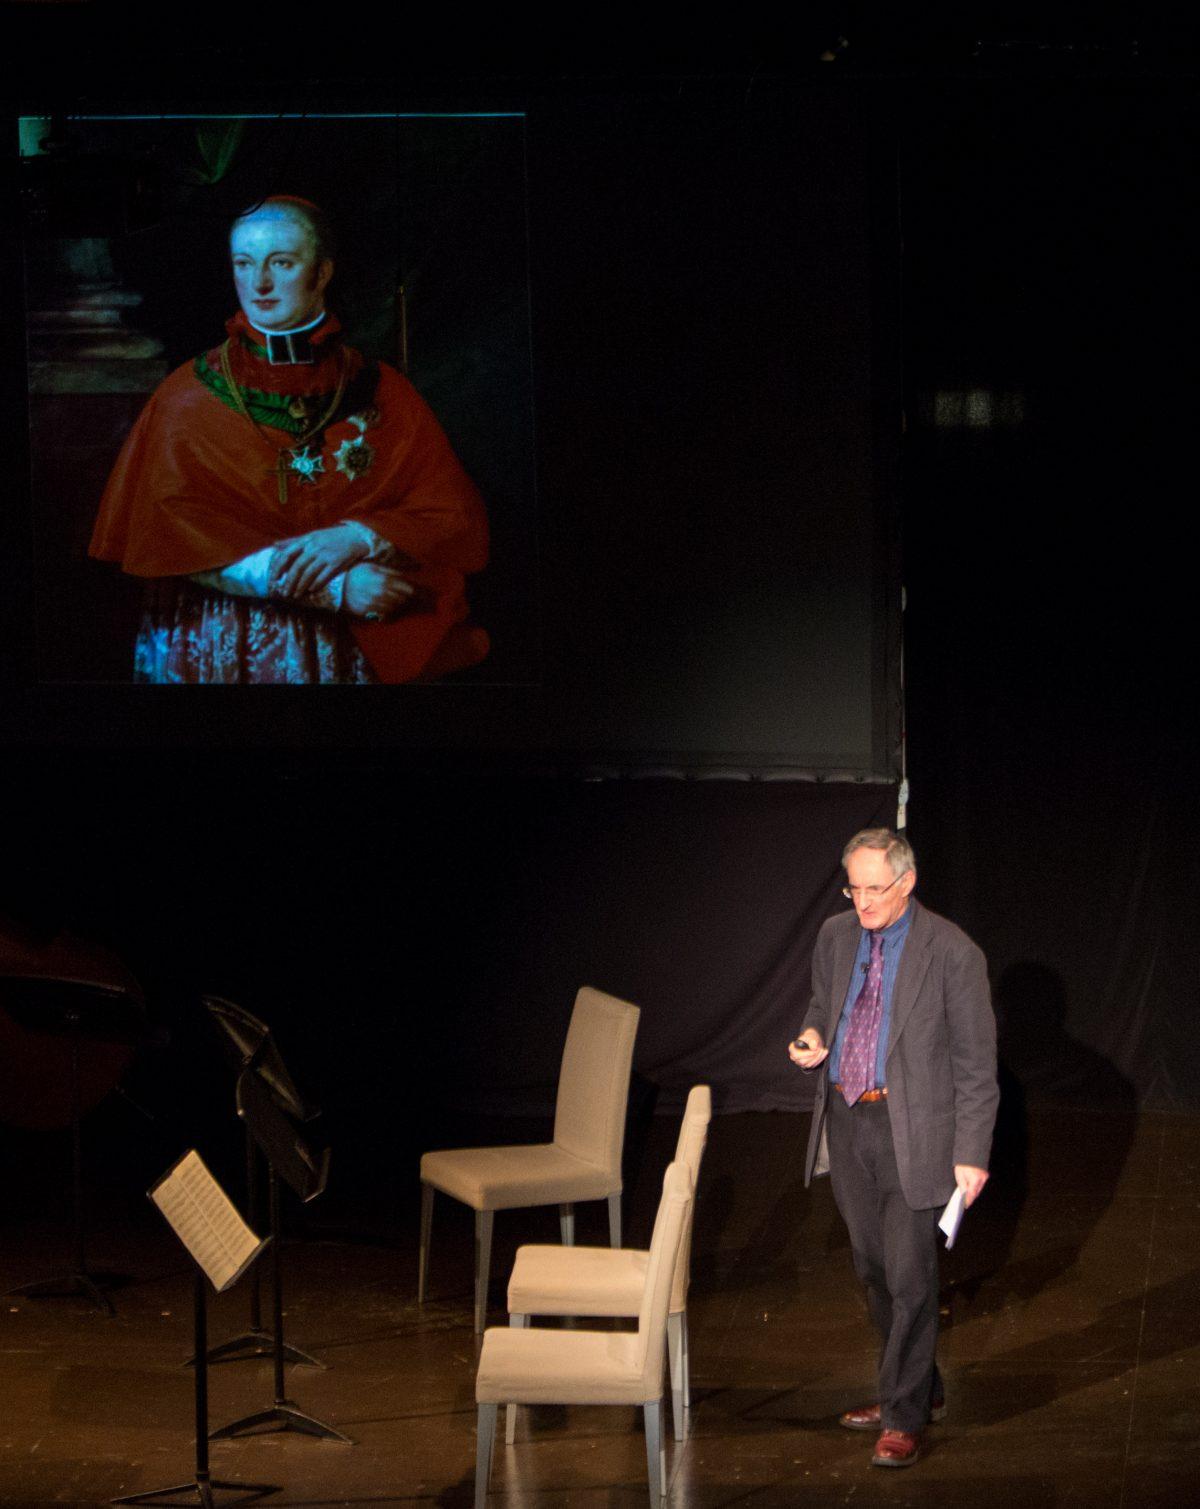 Misha Donat shows a photograph of Archduke Rudolf of Austria, as he gives his talk about Schubert at the Bohemian National Hall in New York on Dec. 14, 2017. (Benjamin Chasteen/The Epoch Times)